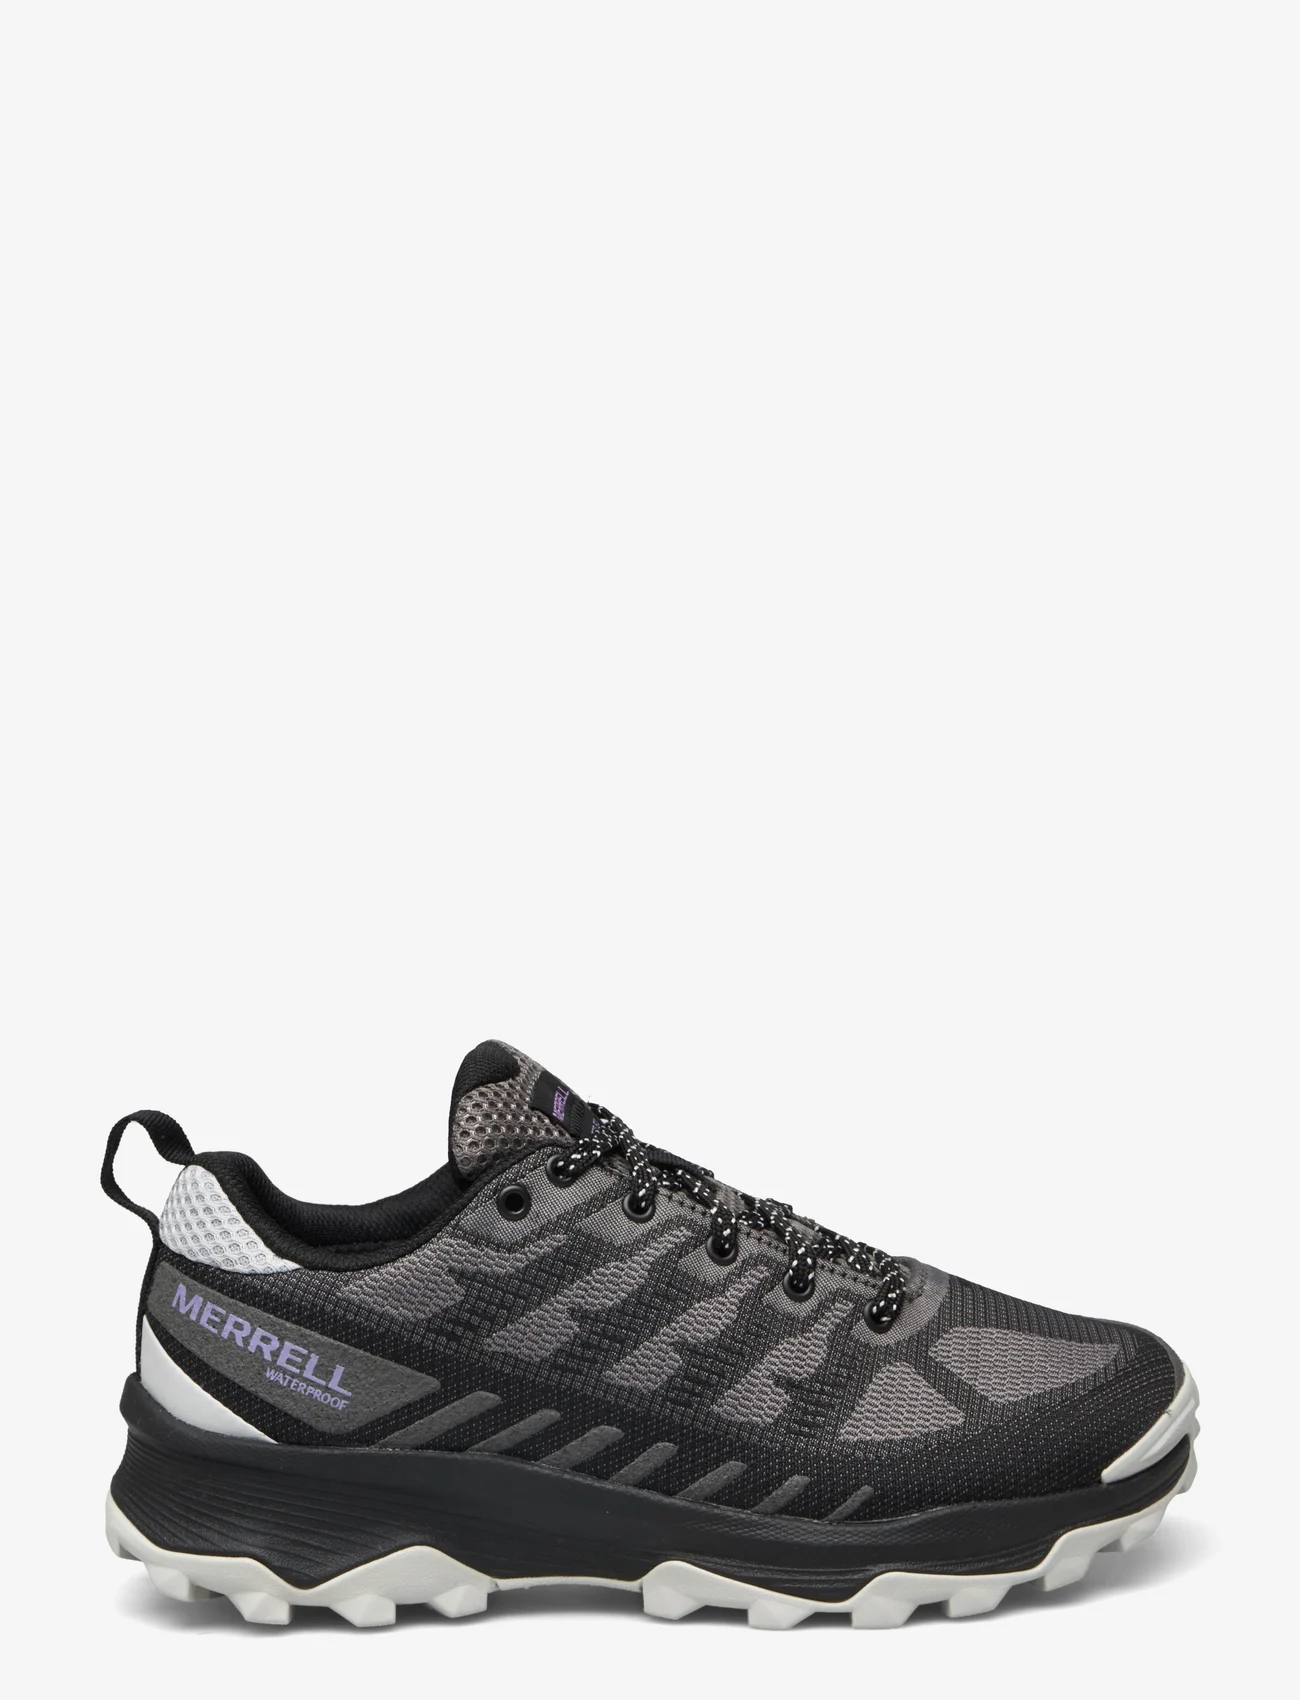 Merrell - Women's Speed Eco WP - Charcoal/Orc - vaelluskengät - charcoal/orchid - 1